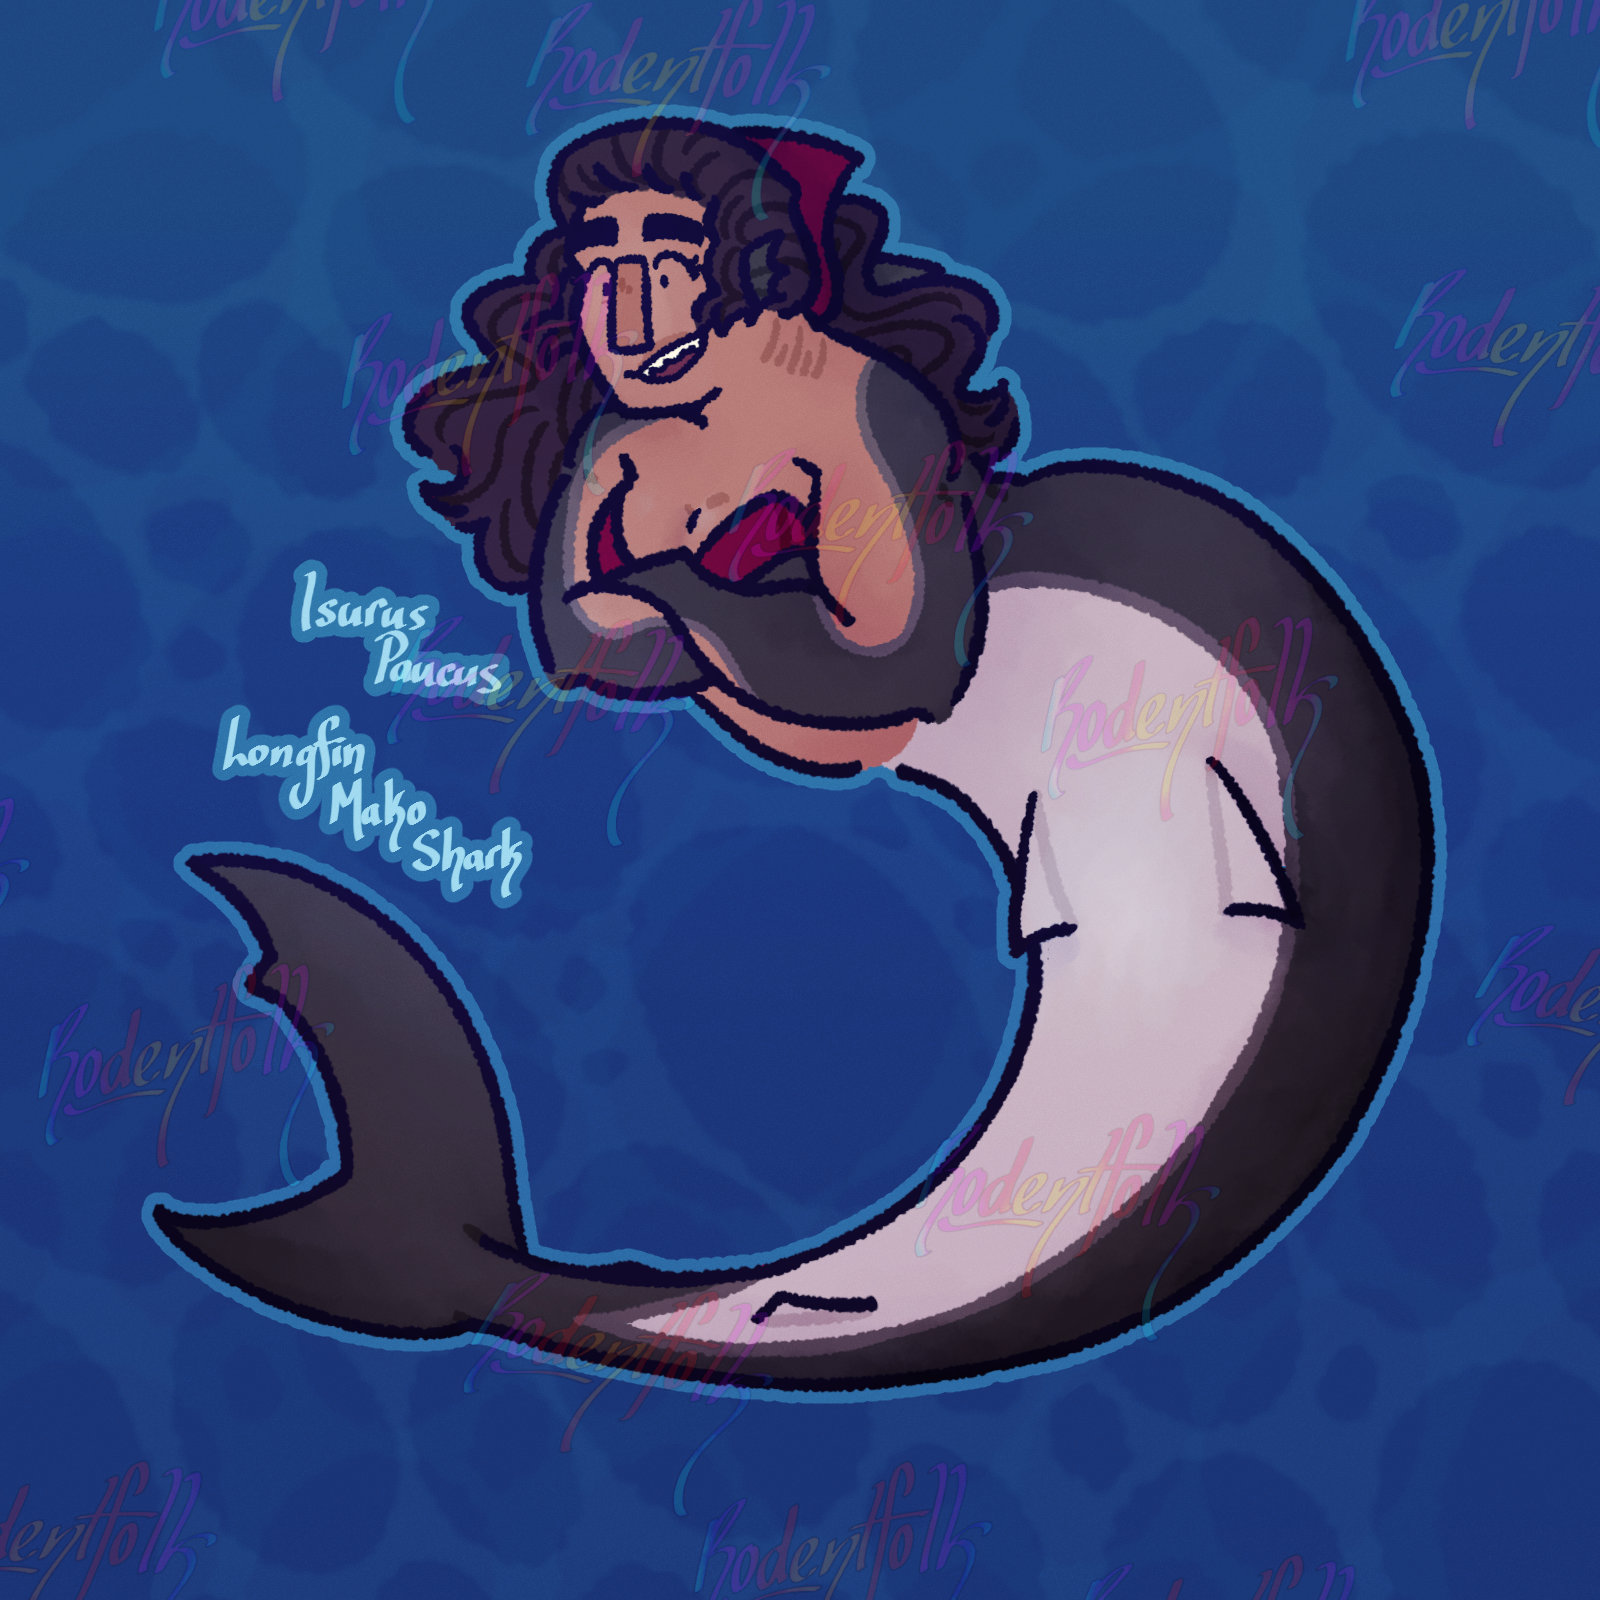 It is a MerMay themed drawing of Nik's OC, Bo, as a mermaid. She's been drawn with the lower-half of a shark (Text next to her notes that she has been drawn as a Longfin Mako Shark (Isurus paucus)). She has her arms crossed over her chest and is looking down at something excitedly.